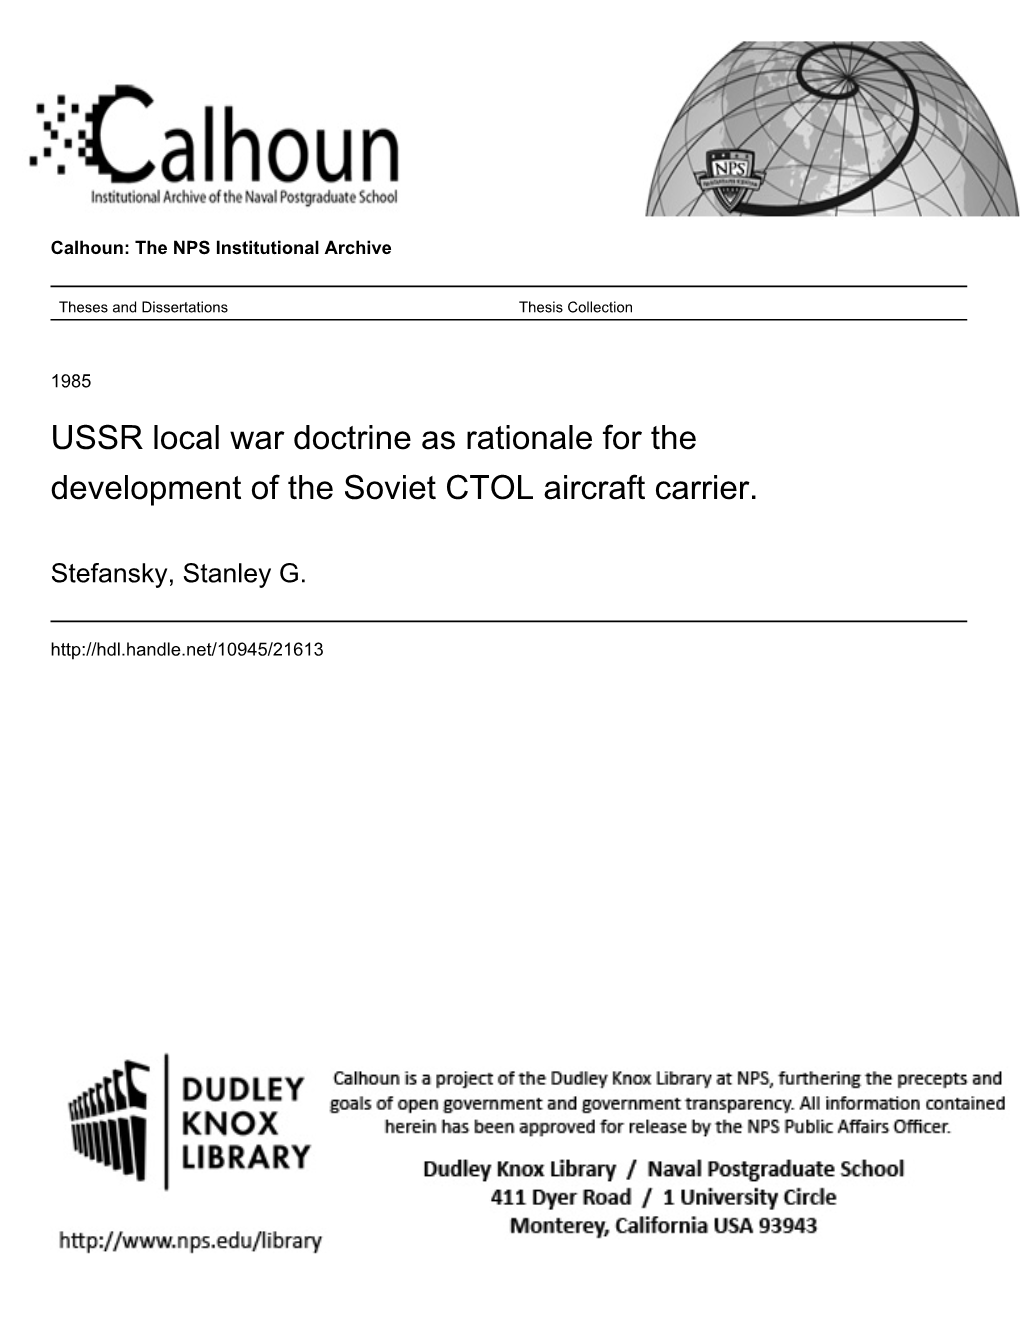 USSR Local War Doctrine As Rationale for the Development of the Soviet CTOL Aircraft Carrier